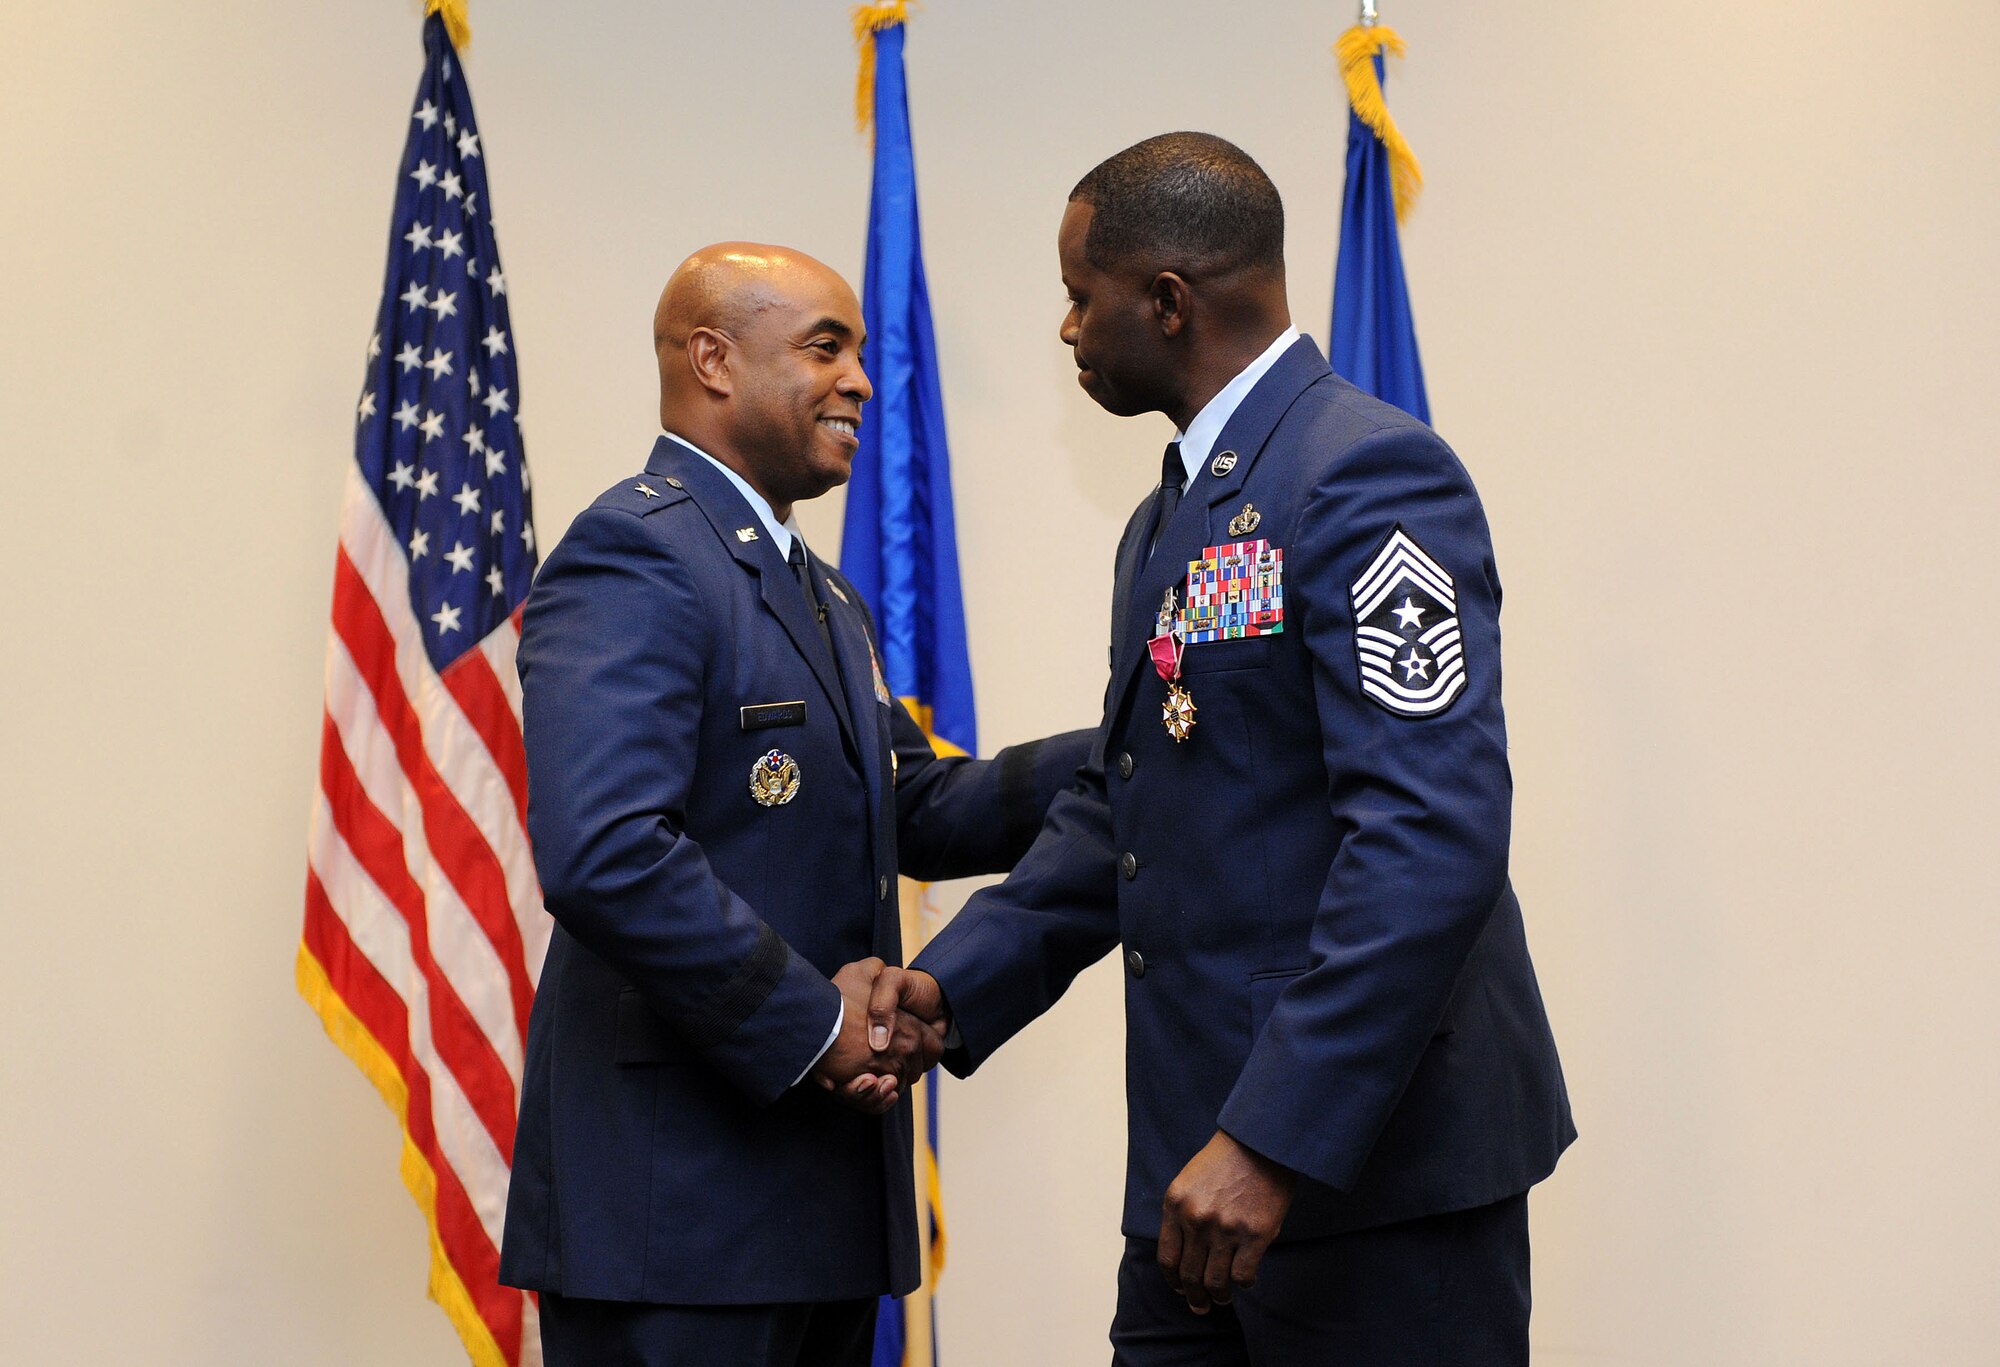 Brig. Gen. Trent Edwards, Headquarters Air Force Space Command financial management and comptroller director, Peterson Air Force Base, Colo., shakes the hand of Chief Master Sgt. Harry Hutchinson, 81st Training Wing command chief, following the presentation of the Legion of Merit during his retirement ceremony at the Roberts Consolidated Aircraft Maintenance Facility Aug. 19, 2016, on Keesler AFB, Miss. Hutchinson retired with more than 29 years of military service and served multiple assignments in Washington, Korea, Maryland, Japan, Nevada, South Dakota and Africa. He also worked as the superintendent of the U.S. Army’s RED HORSE sites in Iraq and Afghanistan and the Air Force’s 732nd Expeditionary Prime BEEF squadron. (U.S. Air Force photo by Kemberly Groue/Released)